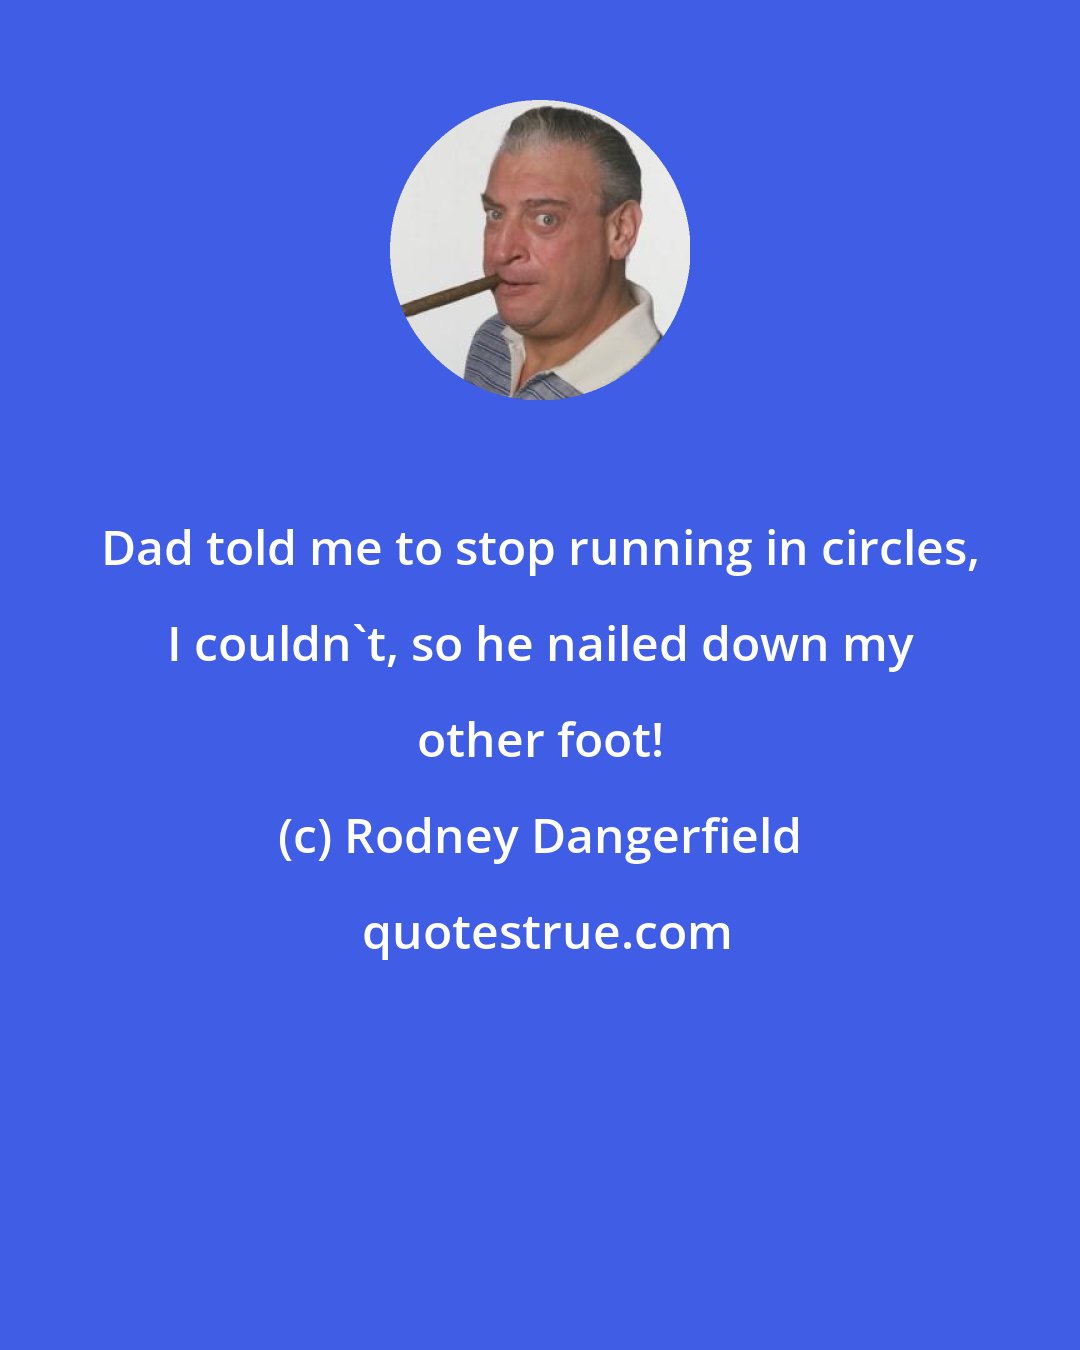 Rodney Dangerfield: Dad told me to stop running in circles, I couldn't, so he nailed down my other foot!